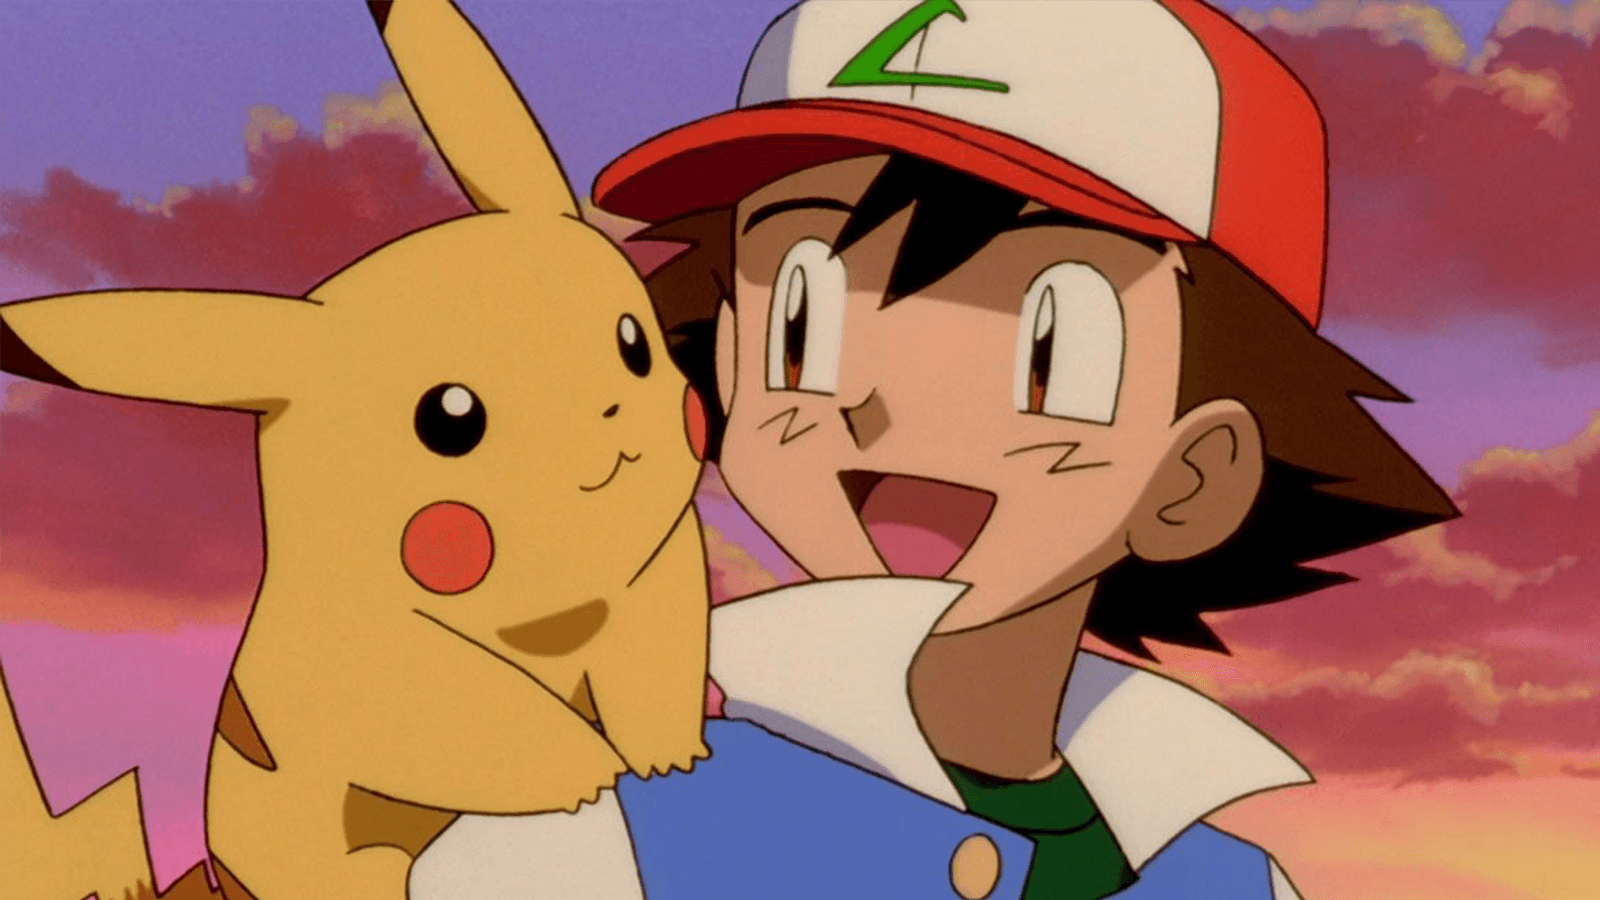 Ash and Pikachu in a sunset